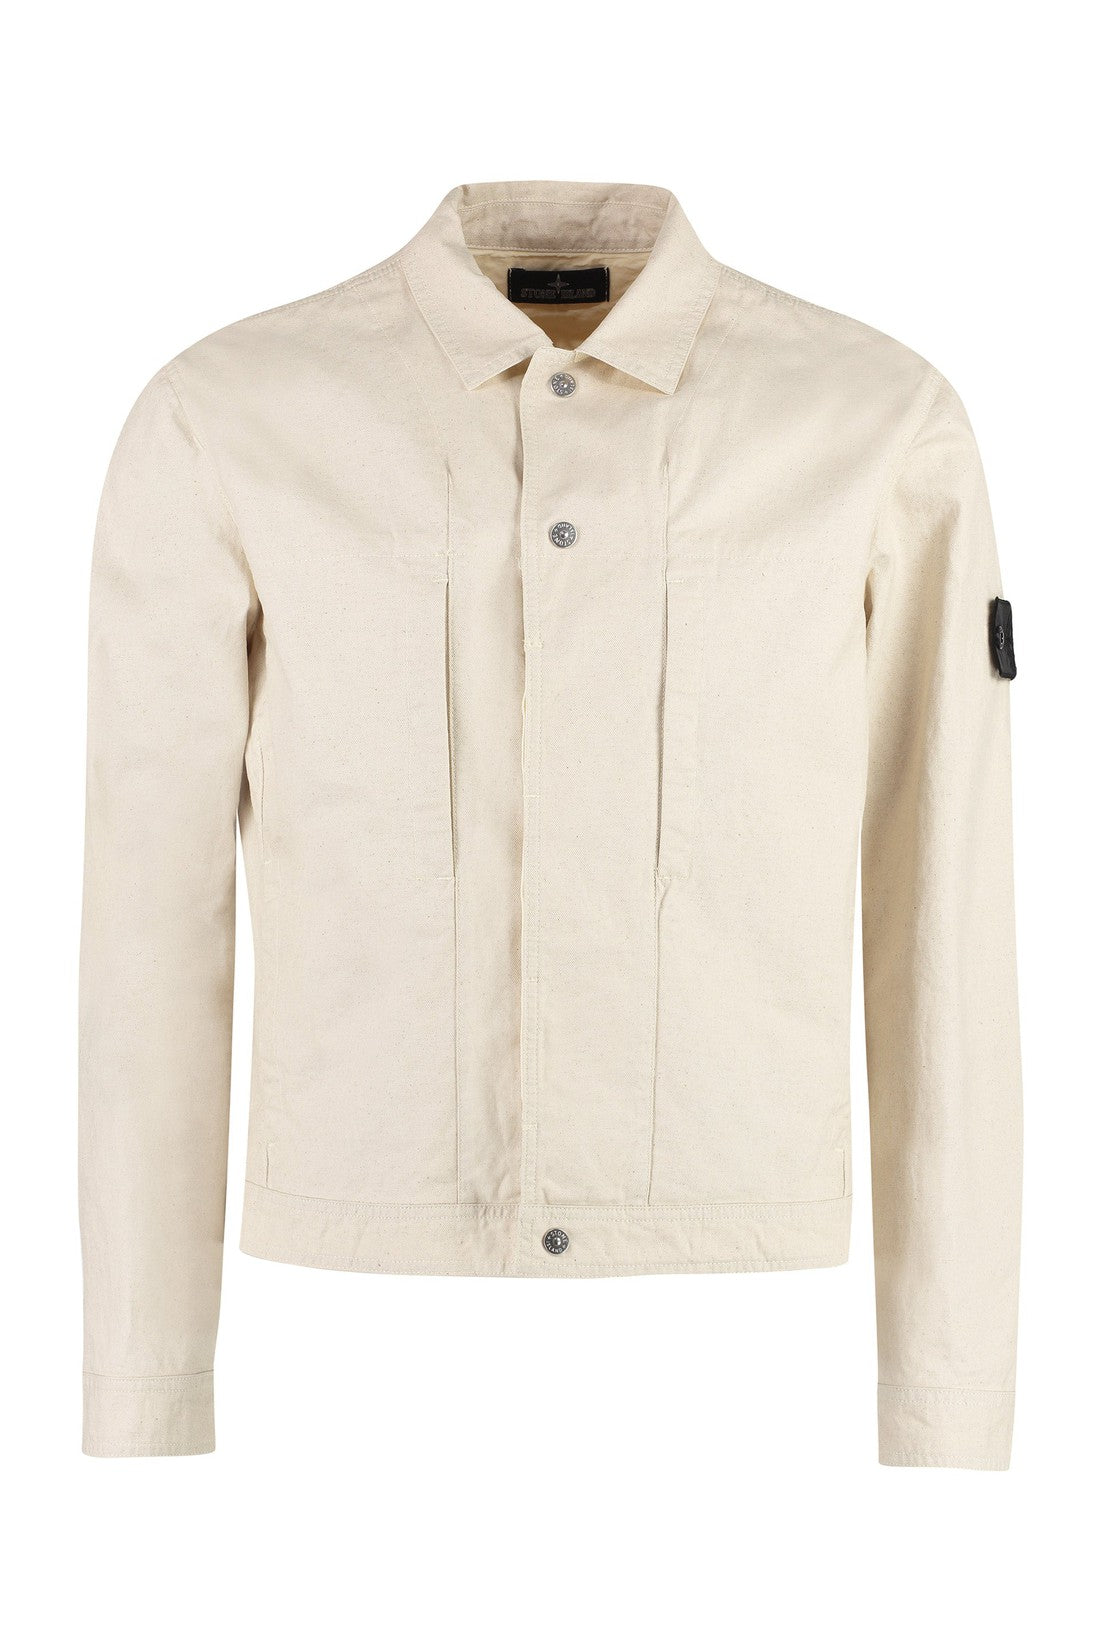 Stone Island Shadow Project-OUTLET-SALE-Trucker cotton overshirt-ARCHIVIST